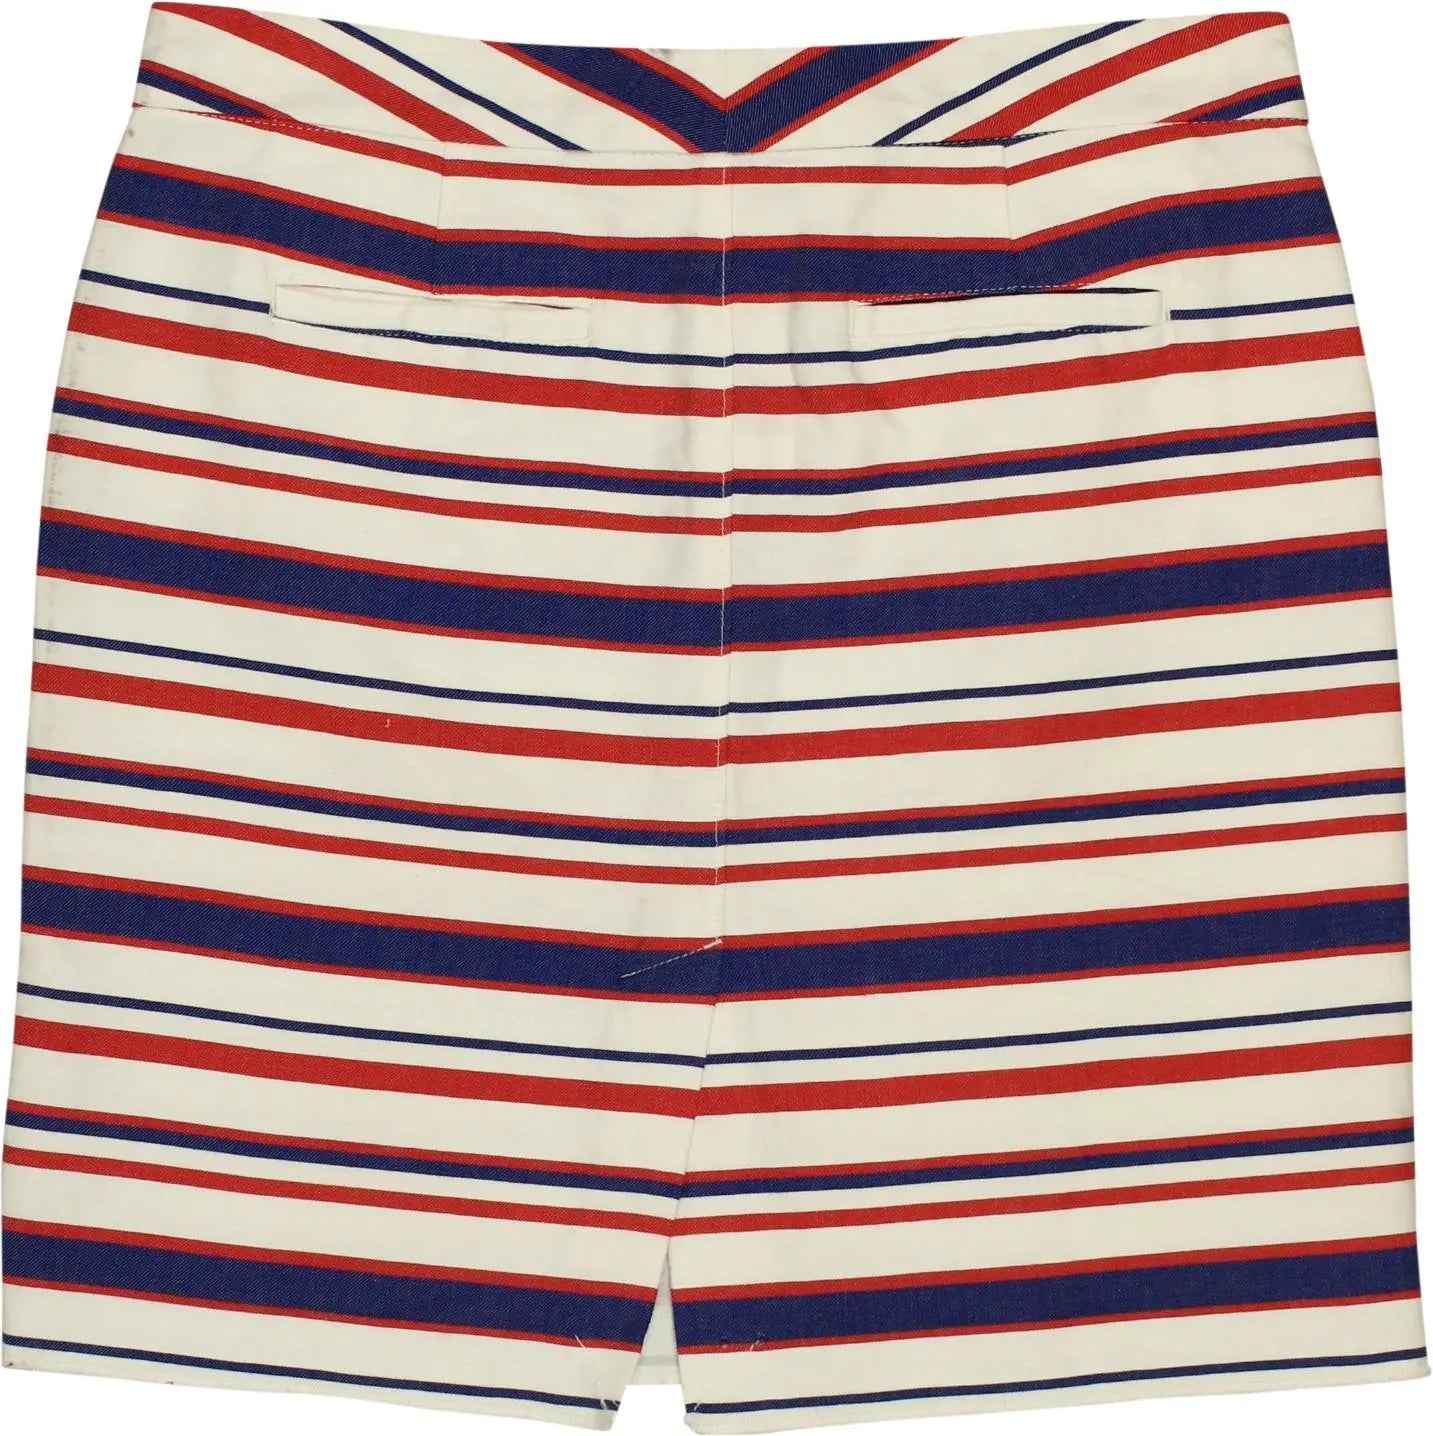 Tommy Hilfiger - Striped Skirt- ThriftTale.com - Vintage and second handclothing